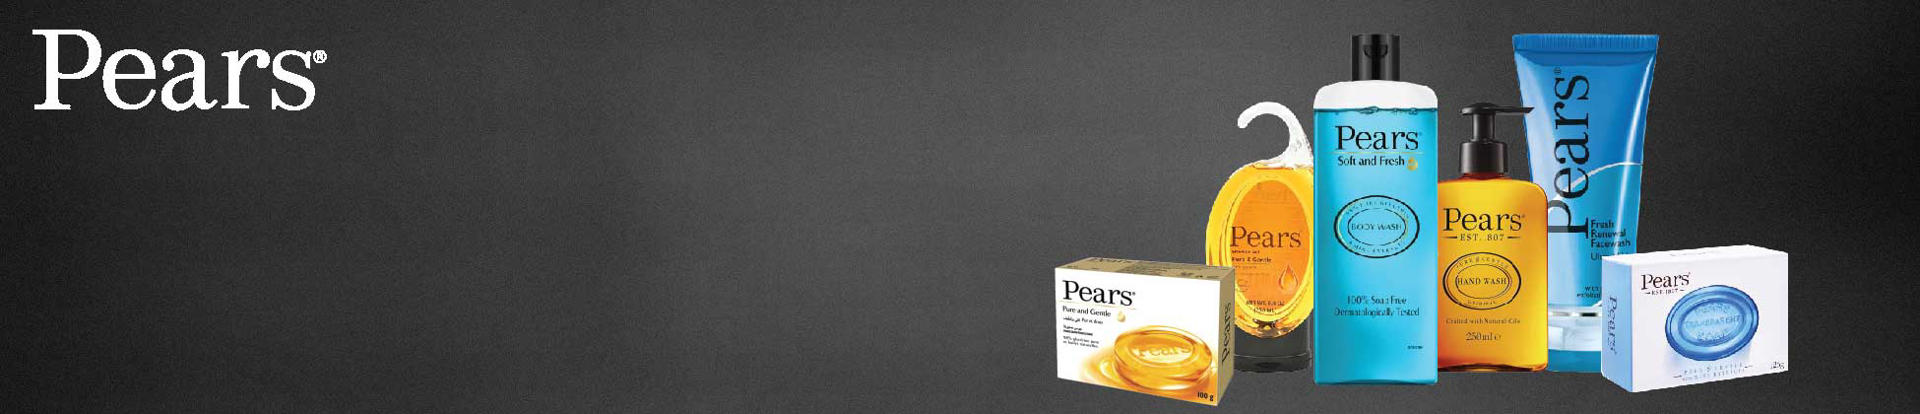 Picture for brand Pears